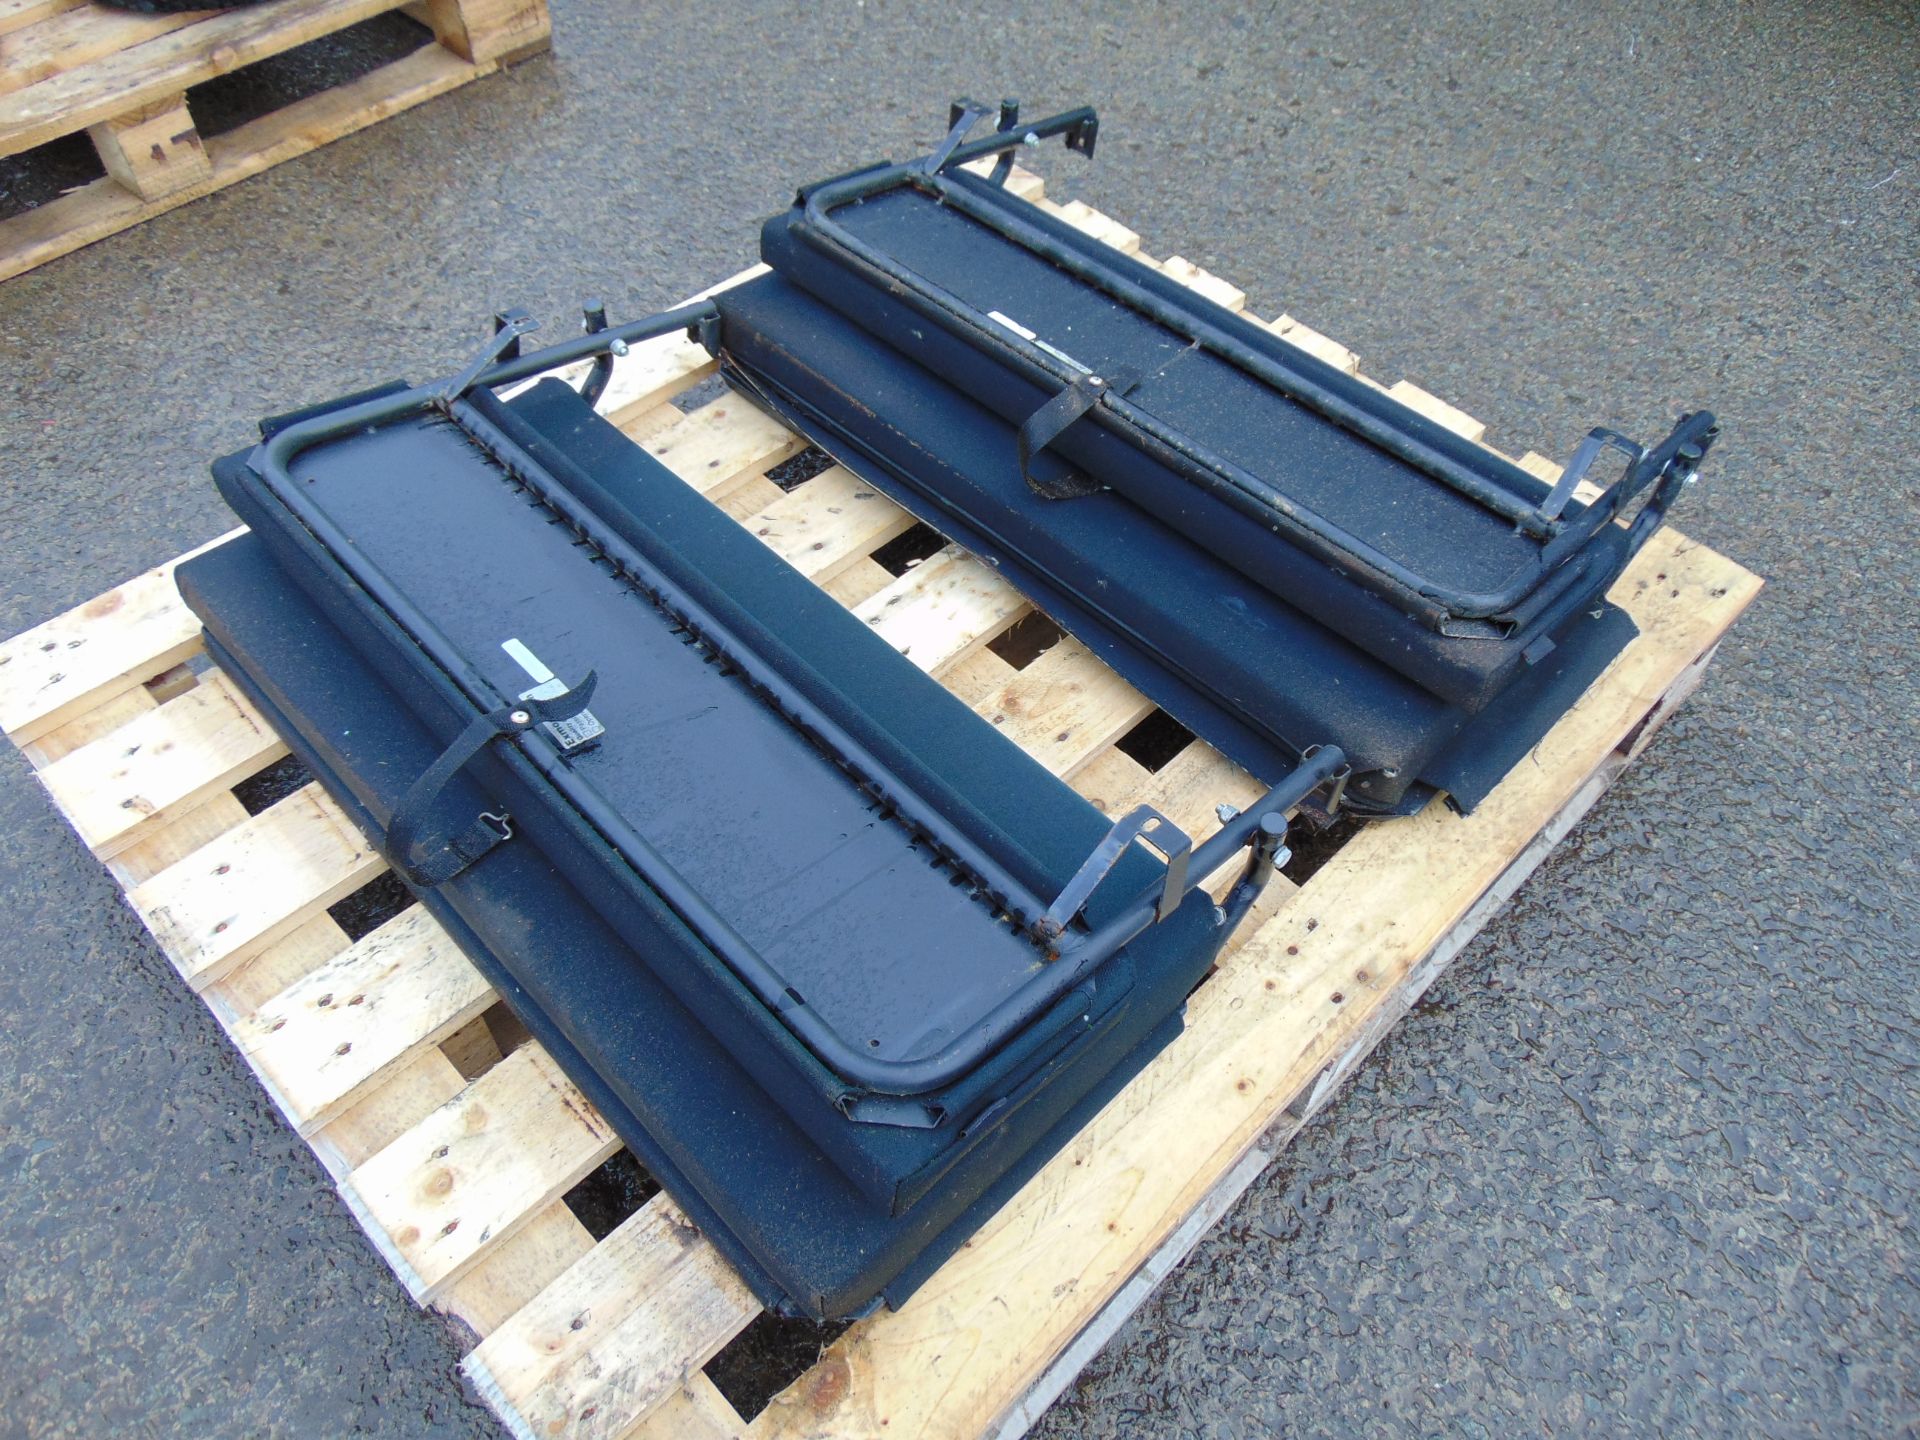 2 x Exmoor Trim Land Rover Defender Fold Down Rear Bench Seats as shown - Image 2 of 5